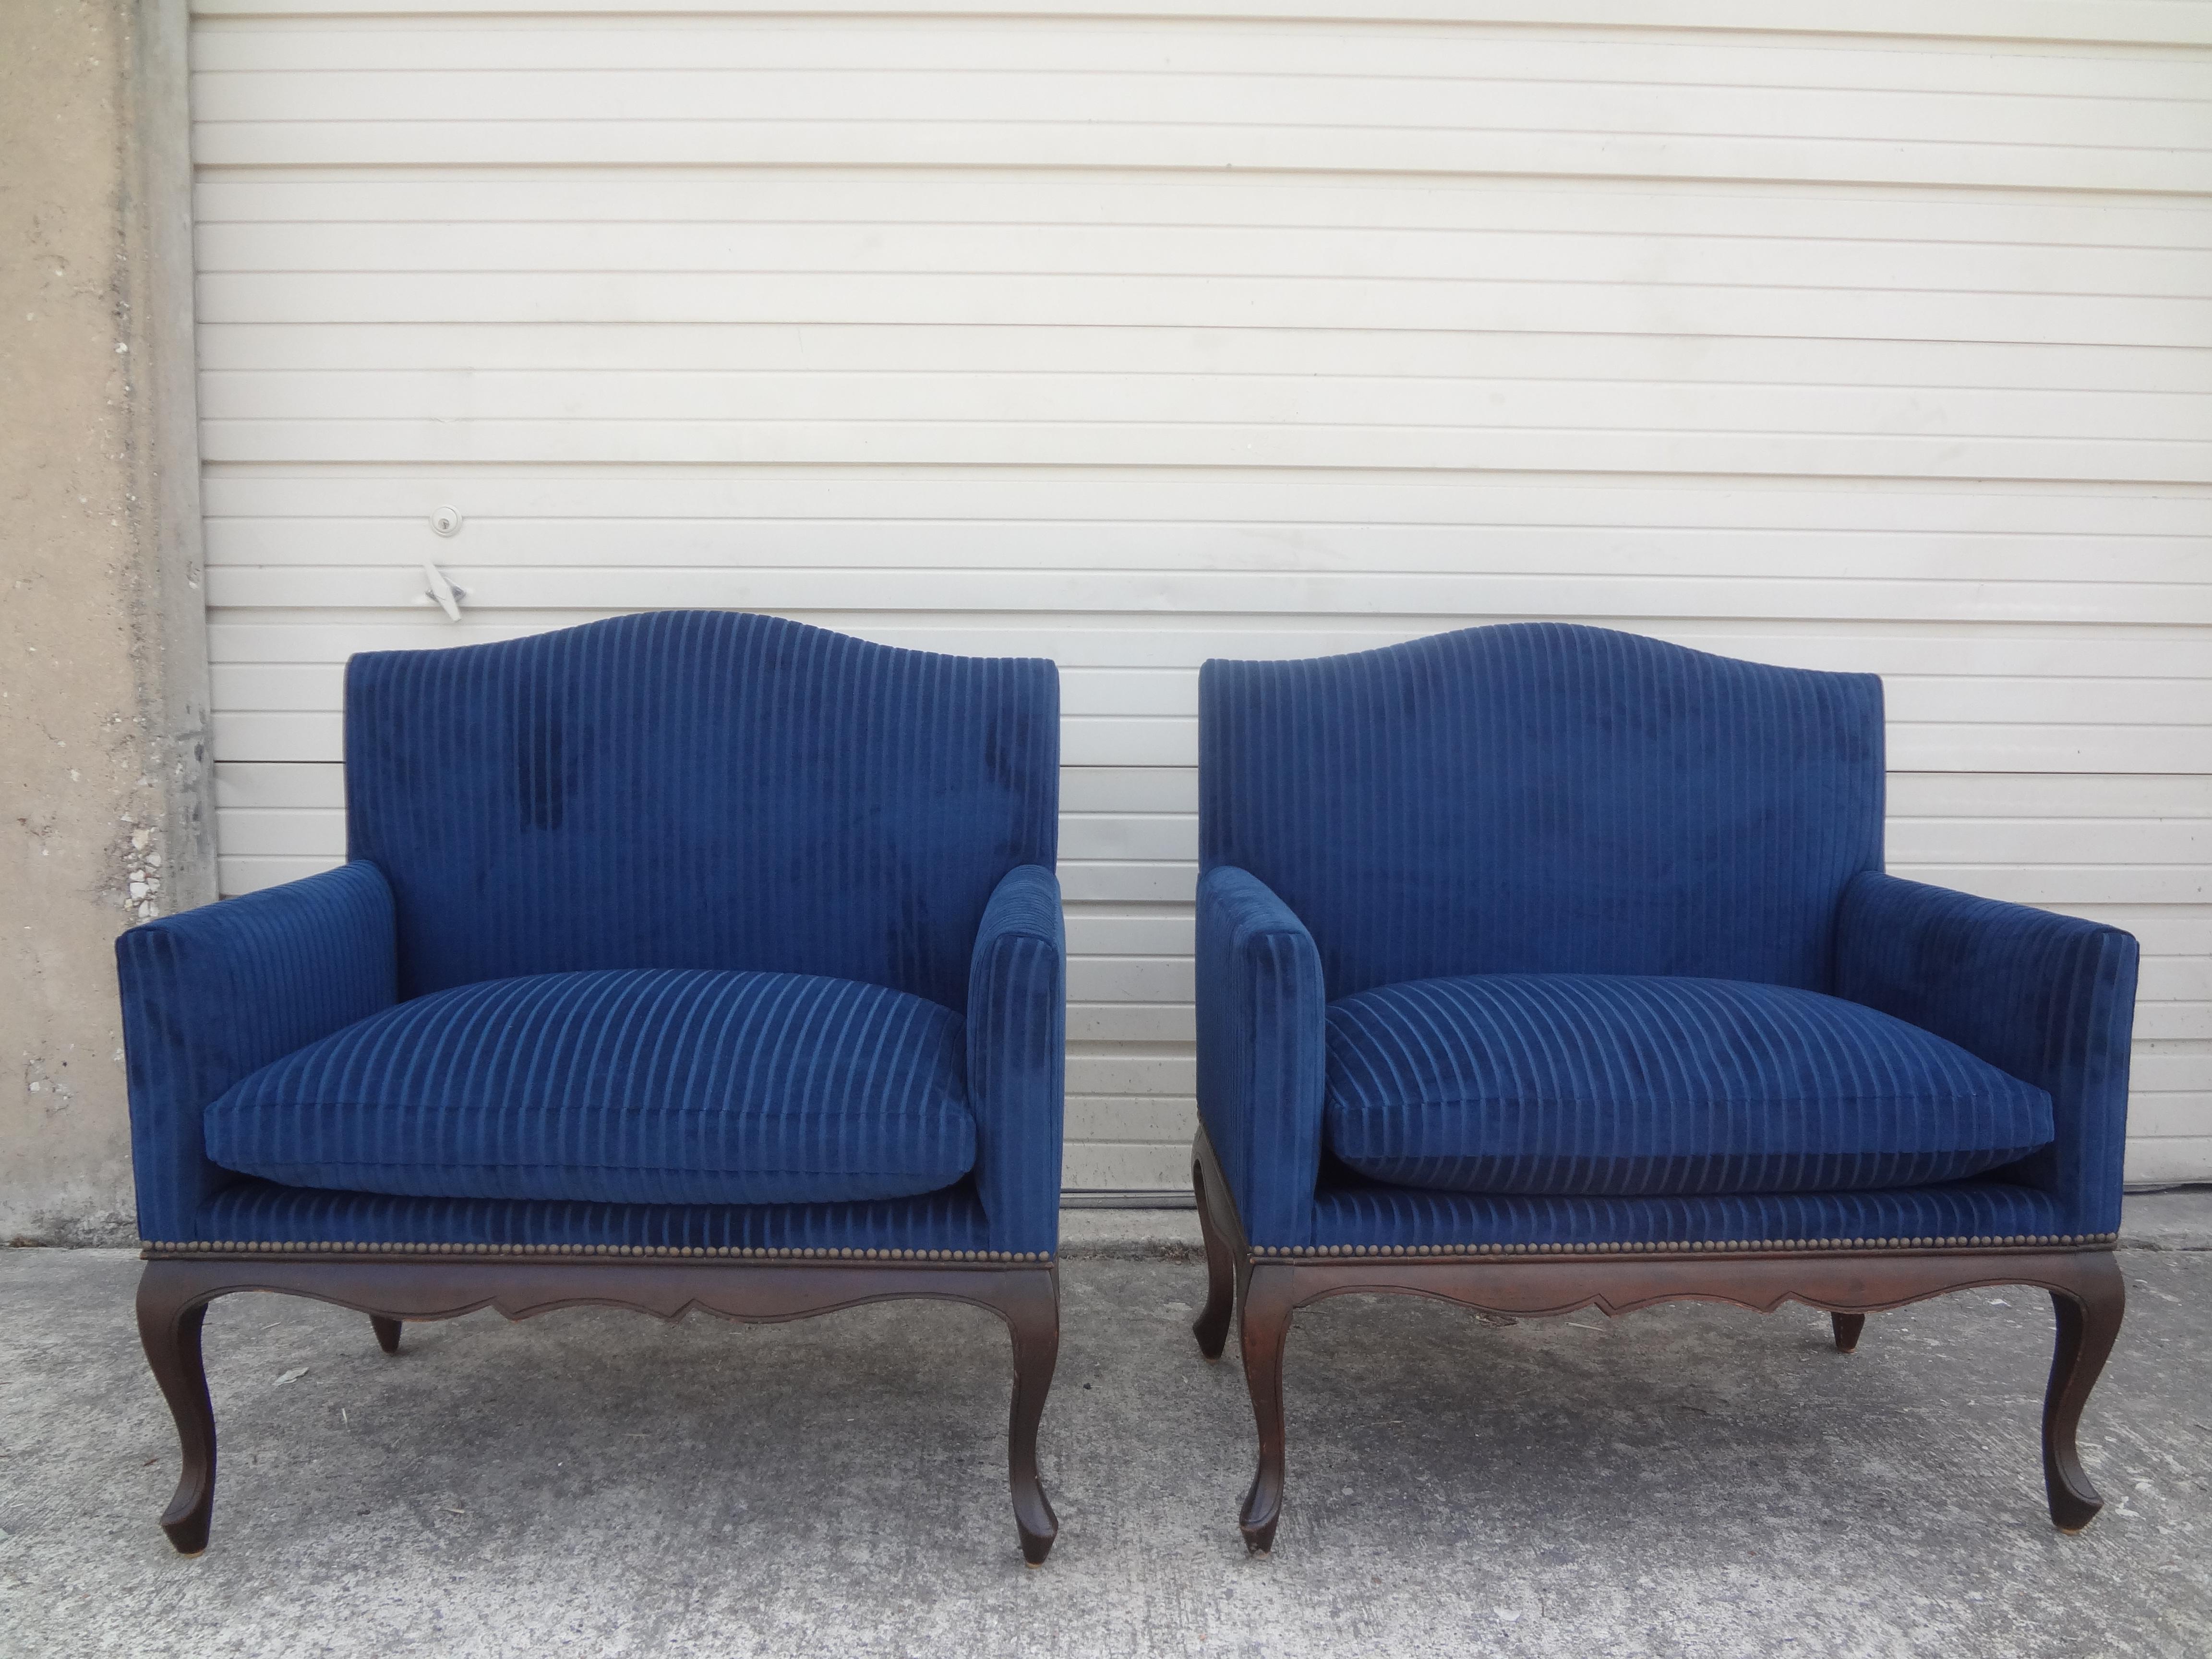 Pair of 19th Century French Louis XV-XVI Style Walnut Marquise or Loveseats For Sale 5